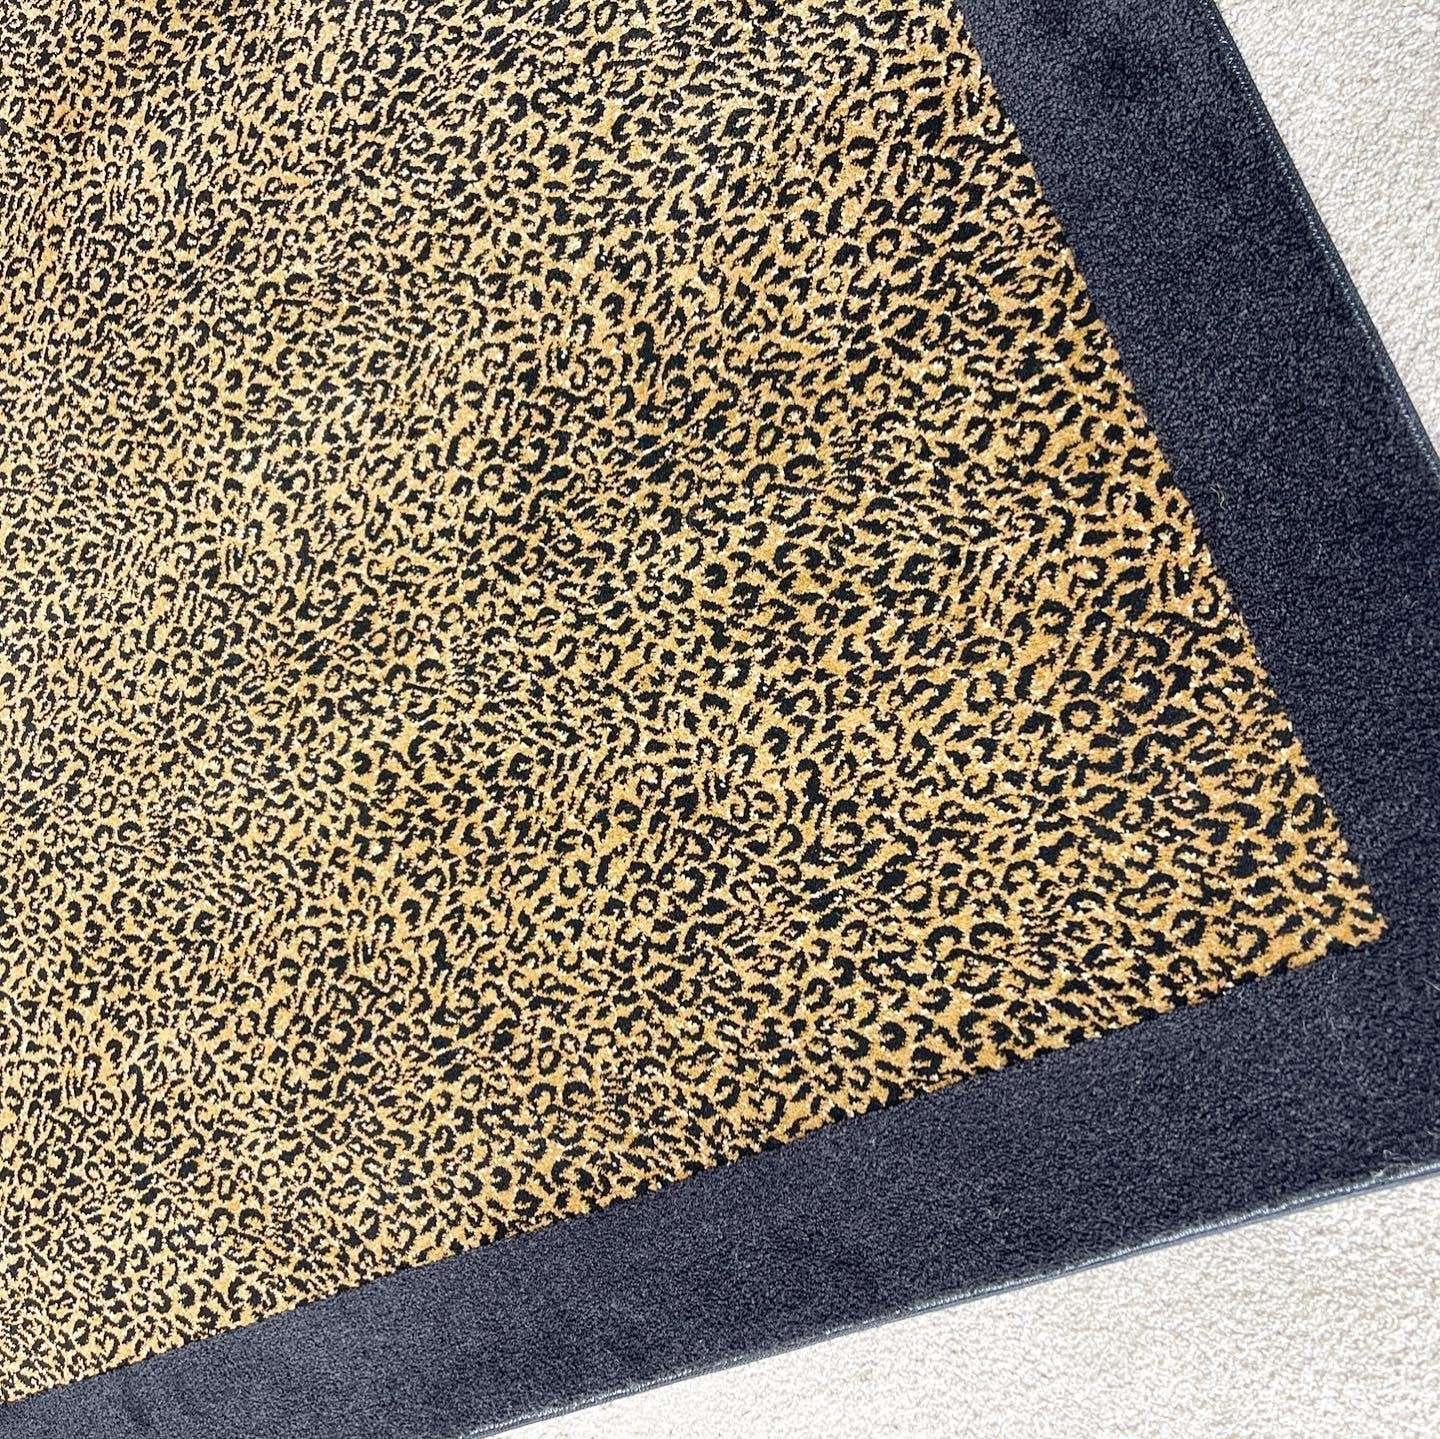 Vintage Black and Leopard Print Rectangular Area Rug In Good Condition For Sale In Delray Beach, FL